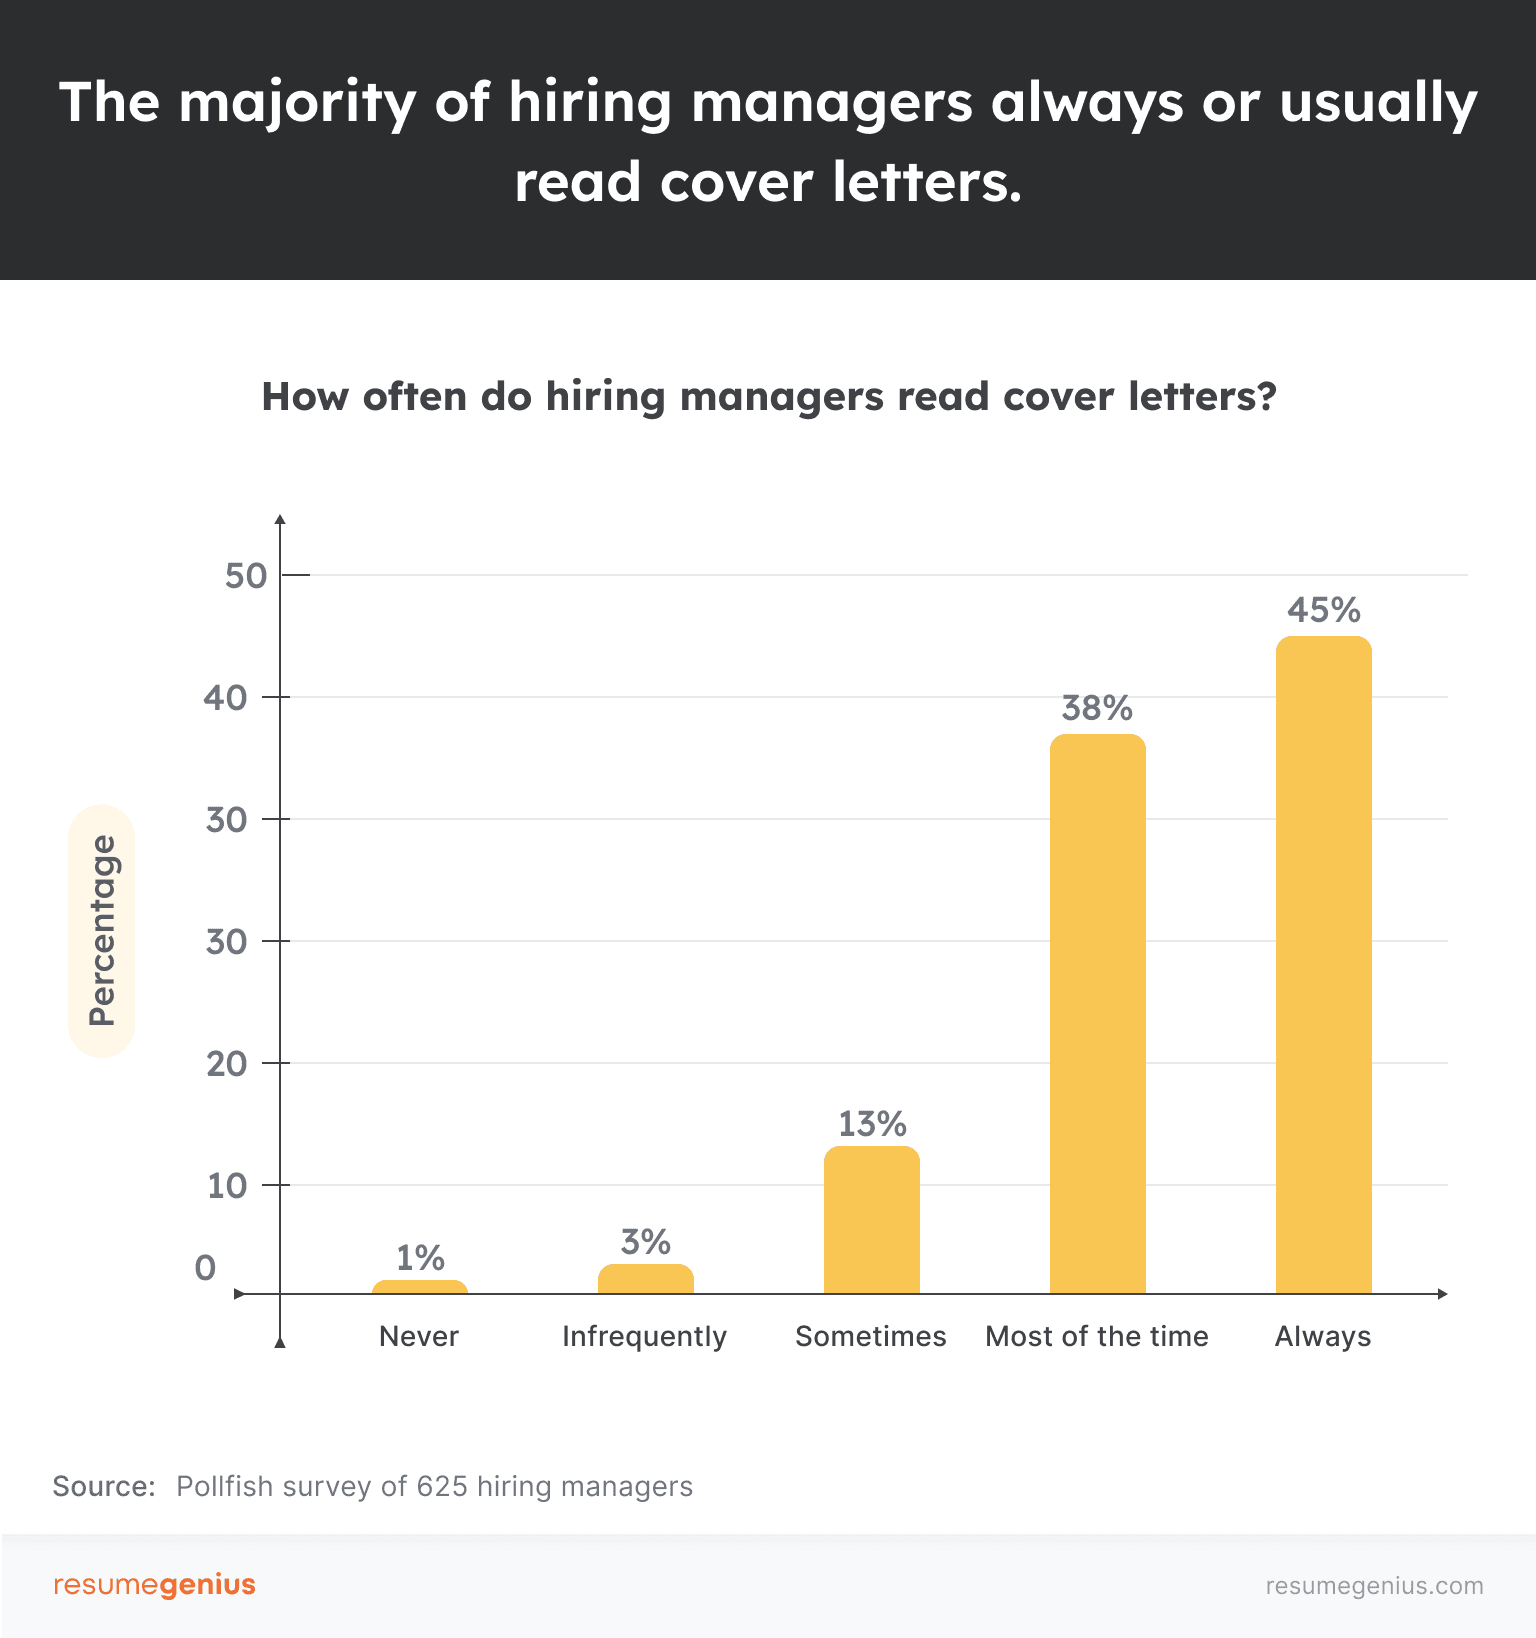 A graph showing survey data that indicates why cover letters are necessary - the vast majority of hiring managers do read them. When asked how often they read cover letters, 45% say always, 38% say most of the time, 13% say sometimes, 3% say infrequently, and 1% say never.